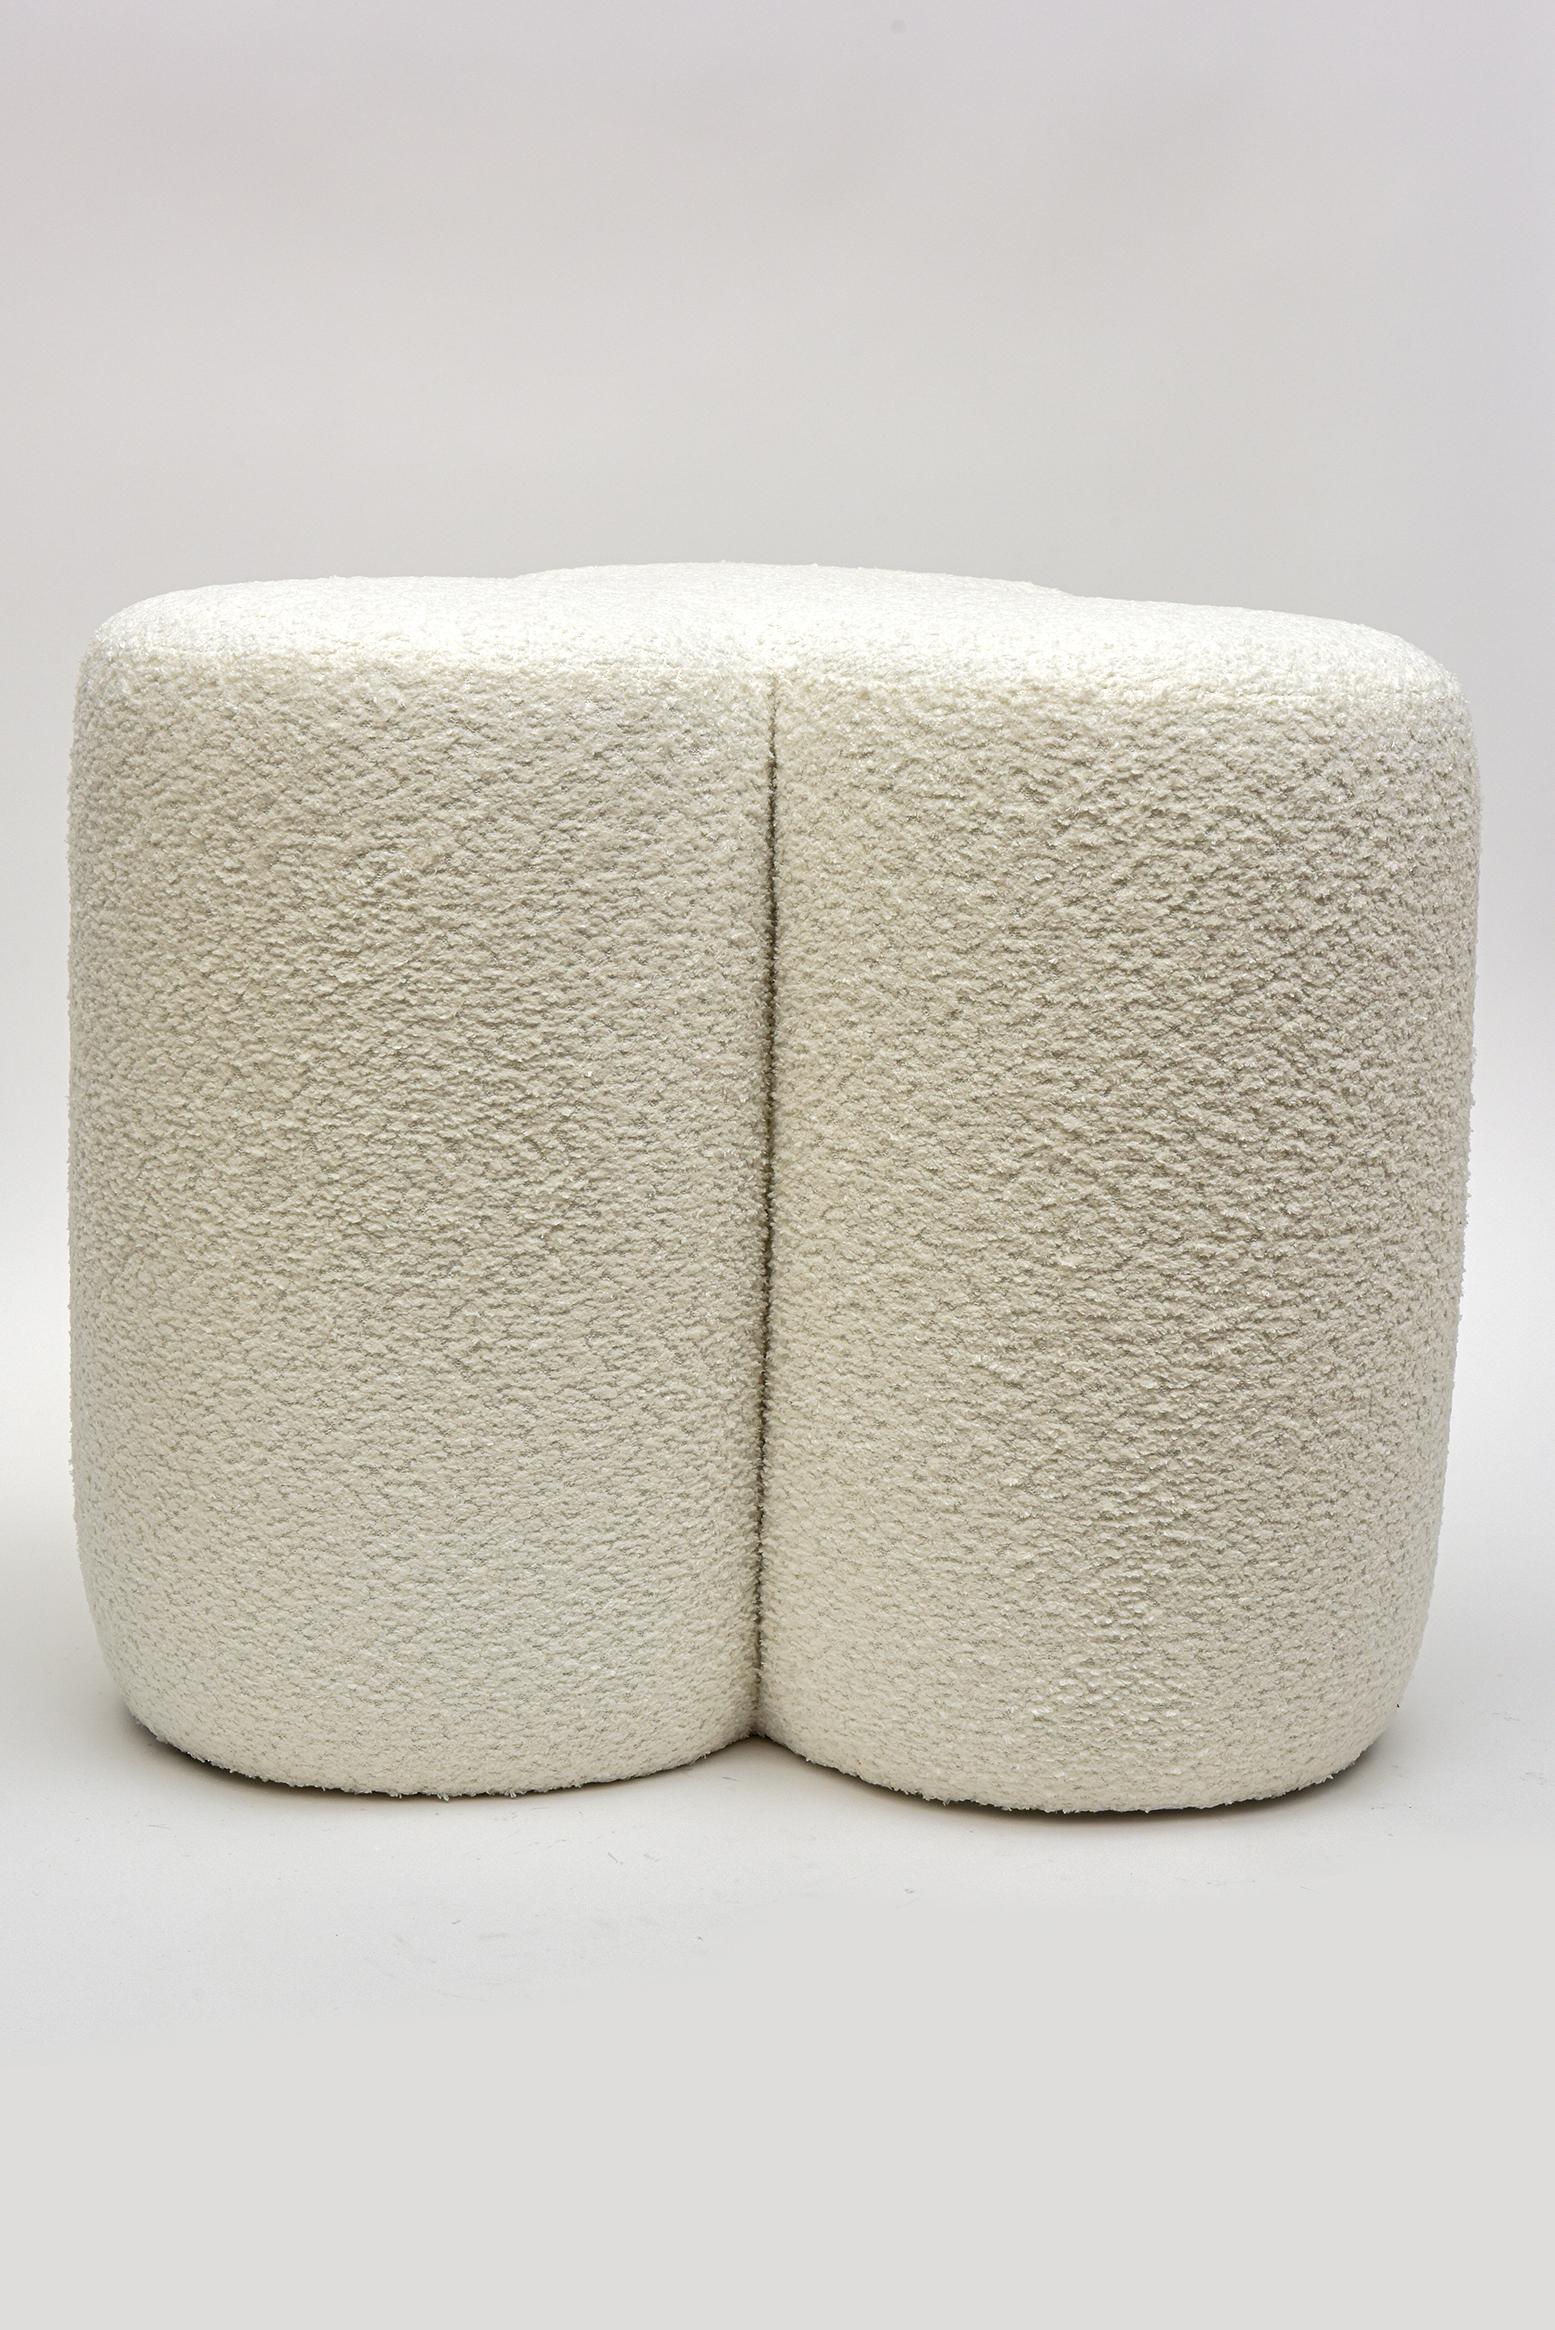 Pair of Custom Upholstered White Bouclé Cloud Ottomans or Benches  3